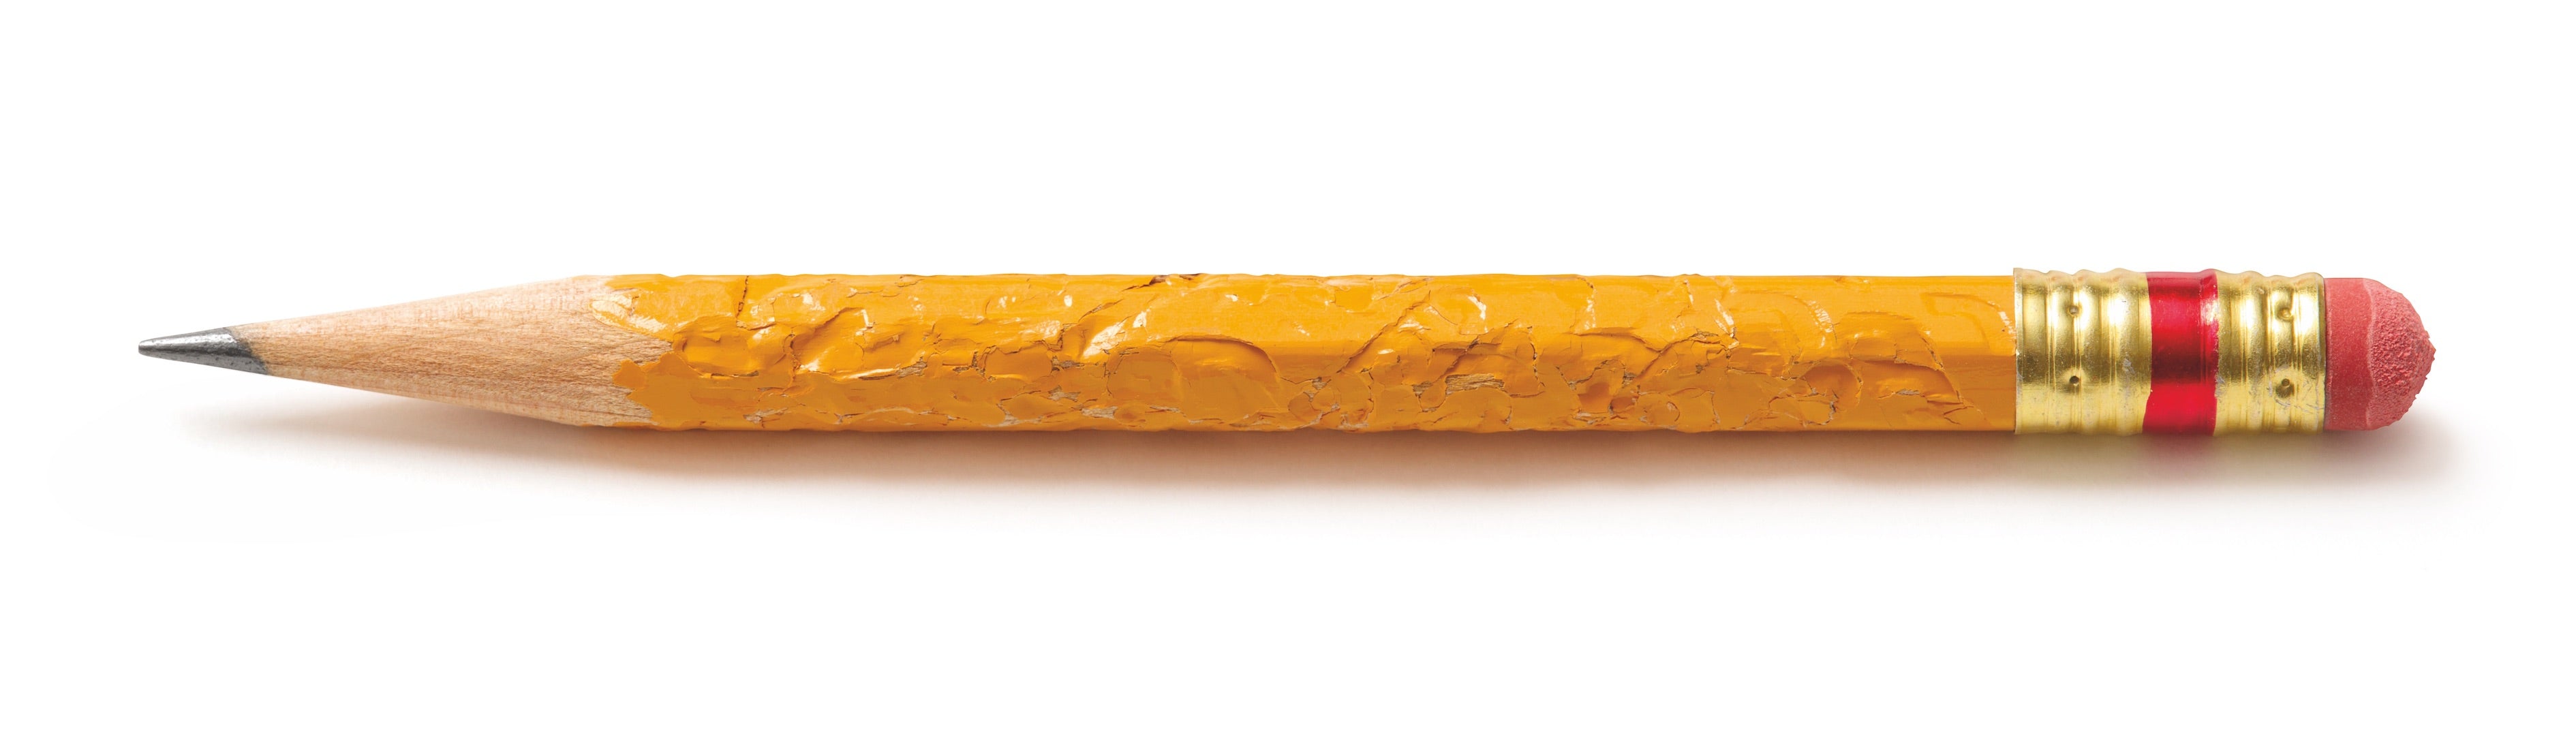 How a pencil beats the cycle industry